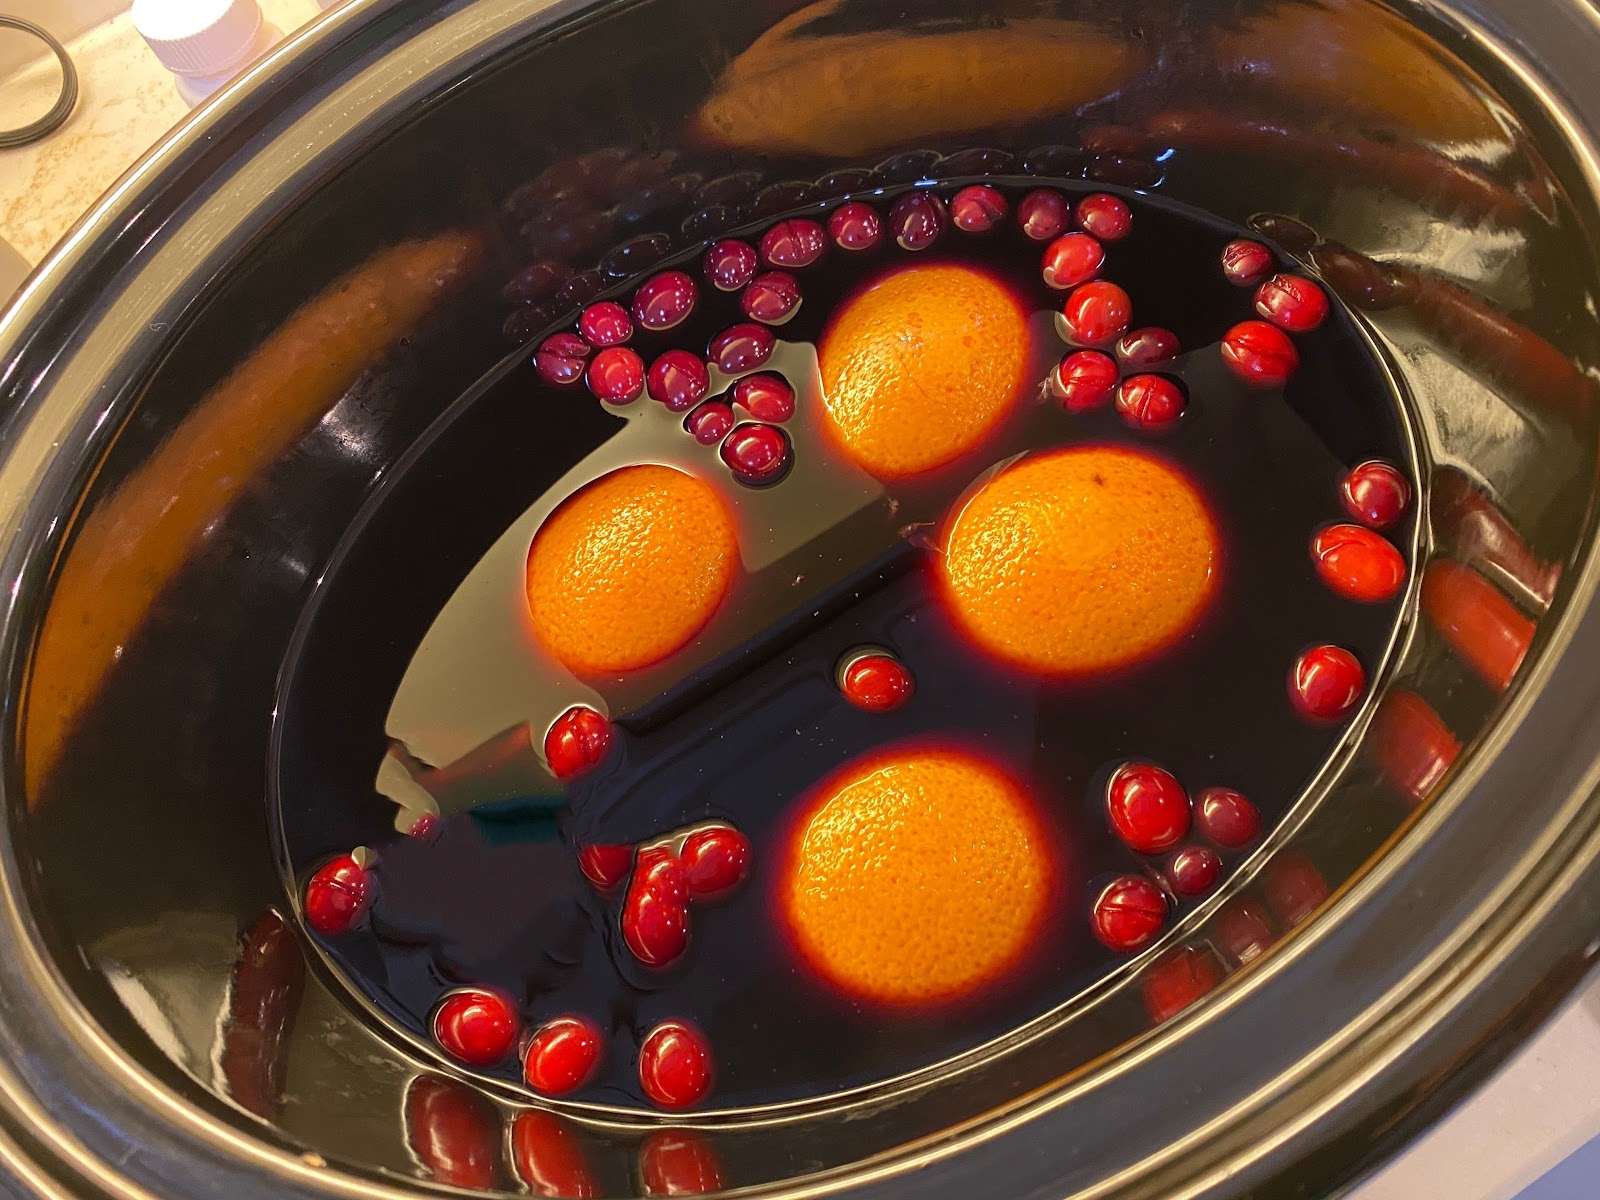 mulled spices cranberries oranges stove cozy home scents